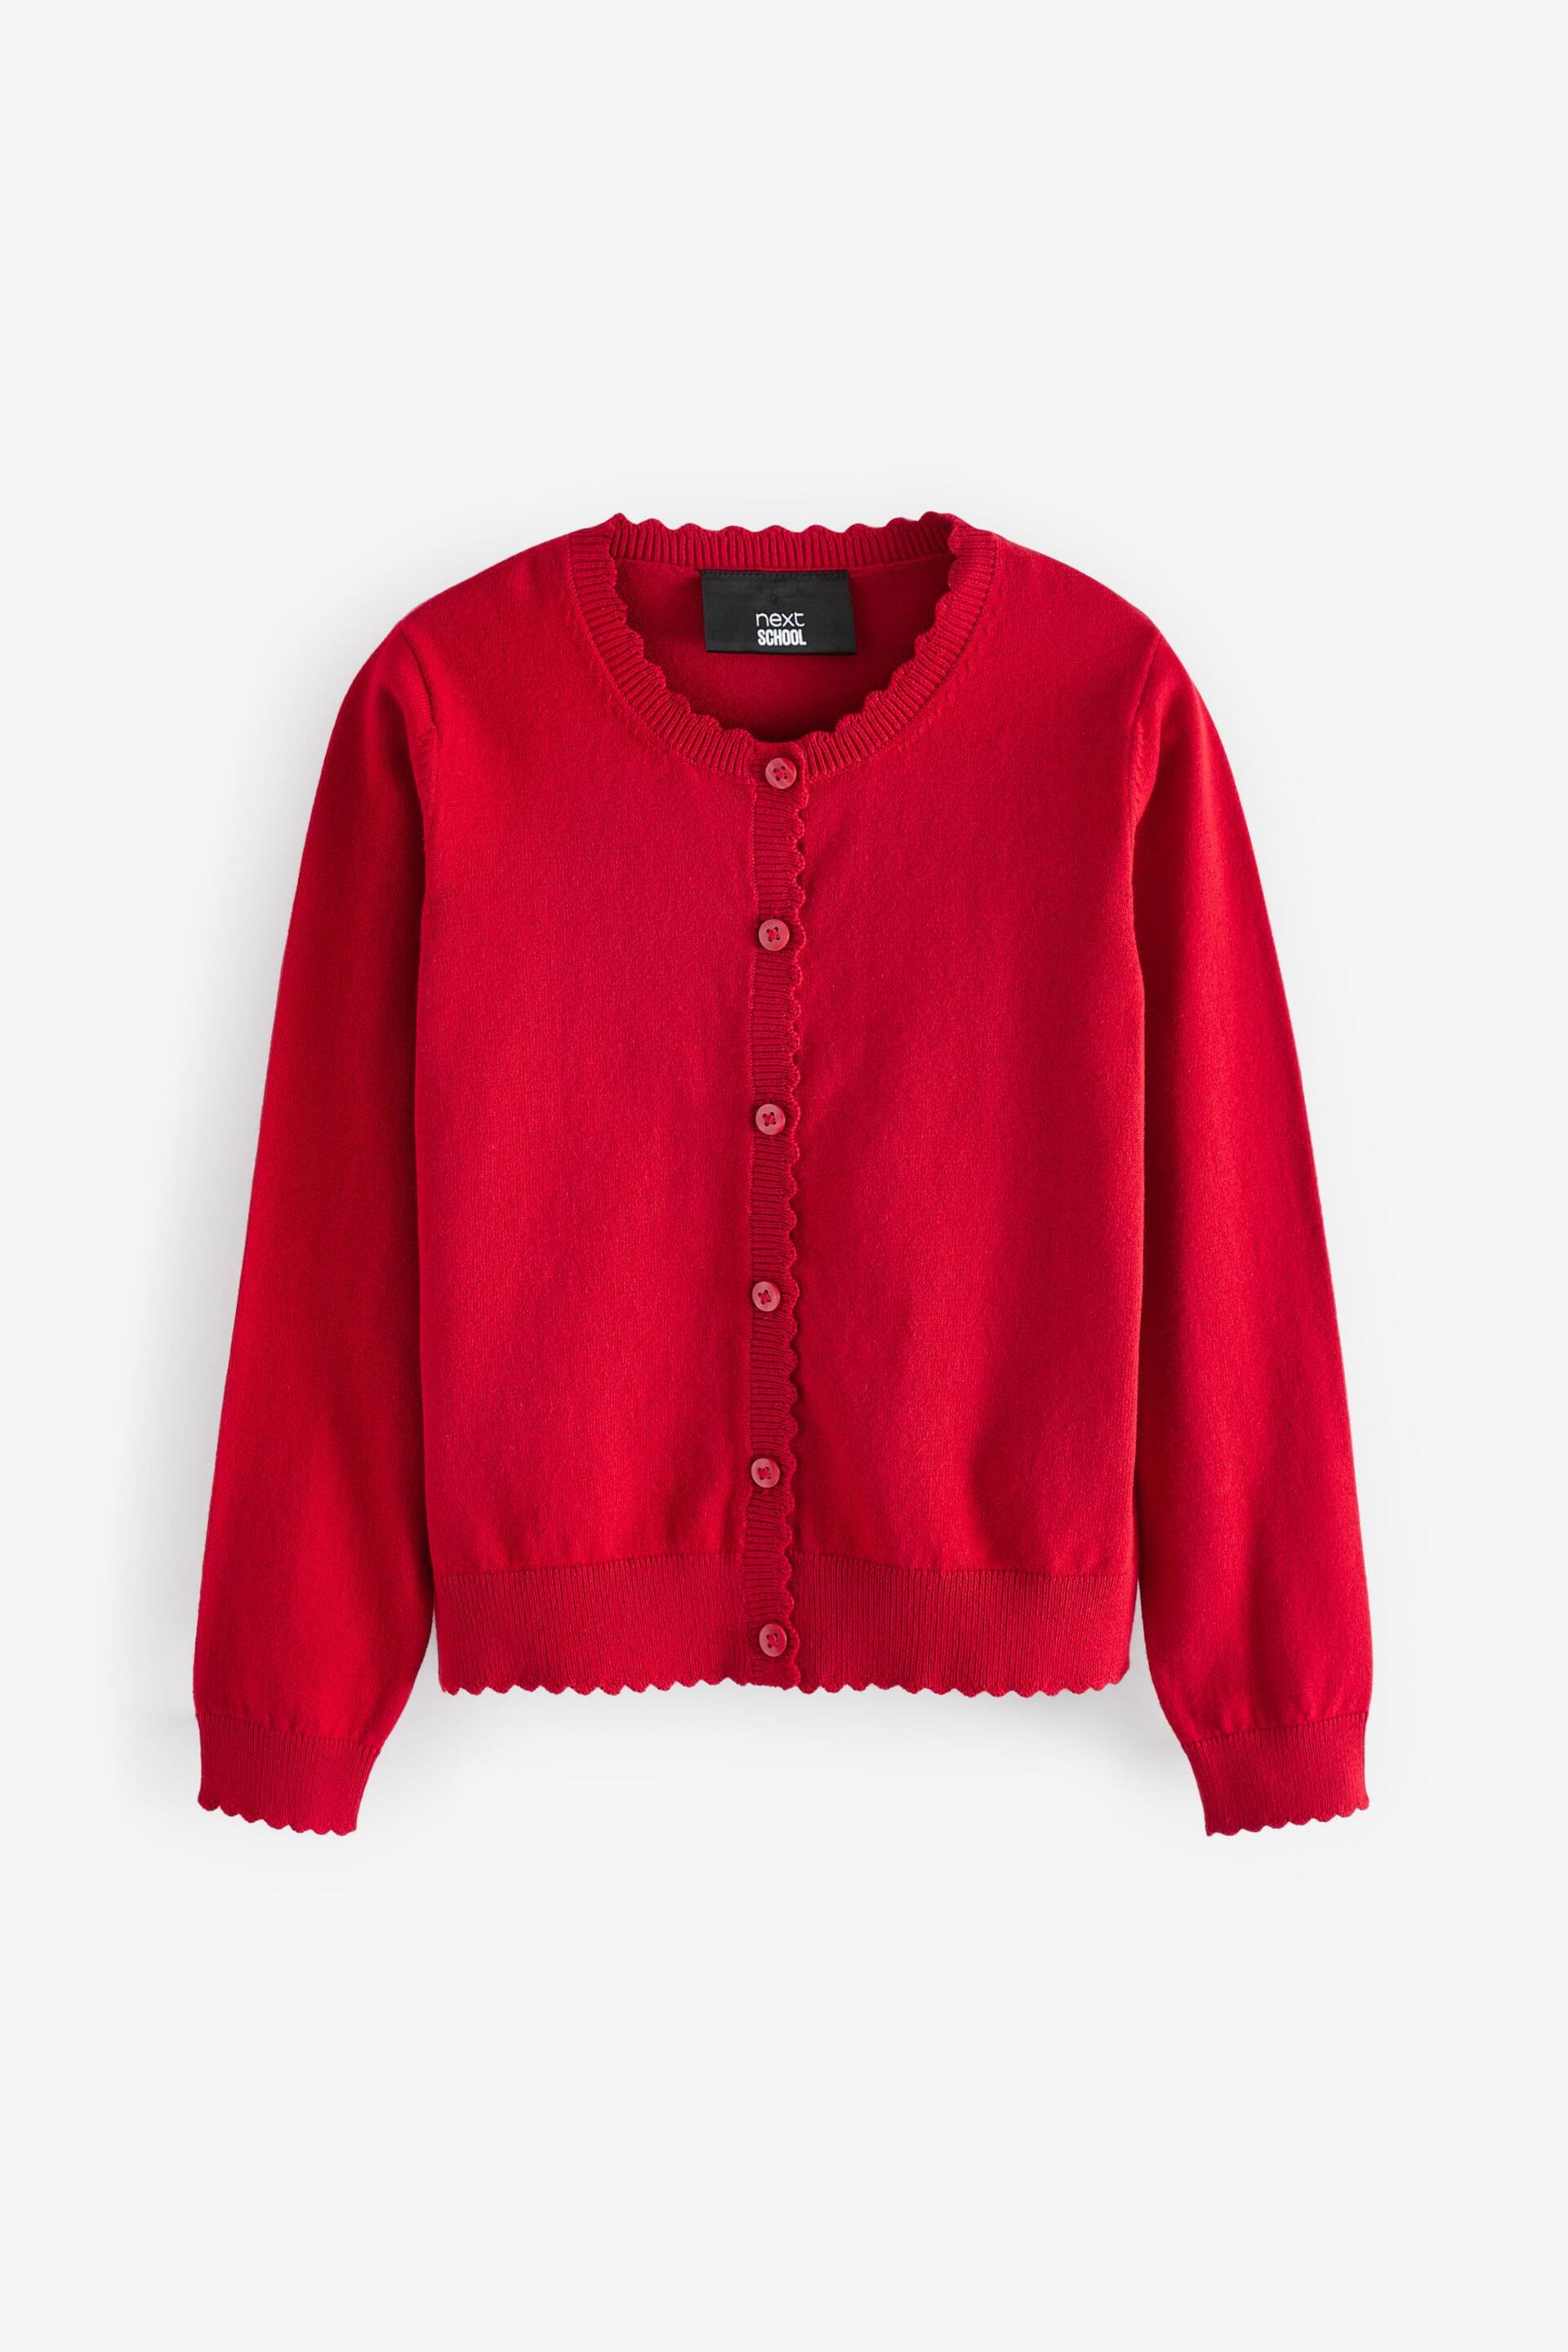 Red Cotton Rich Scalloped Edge School Cardigan (3-16yrs) - Image 5 of 7